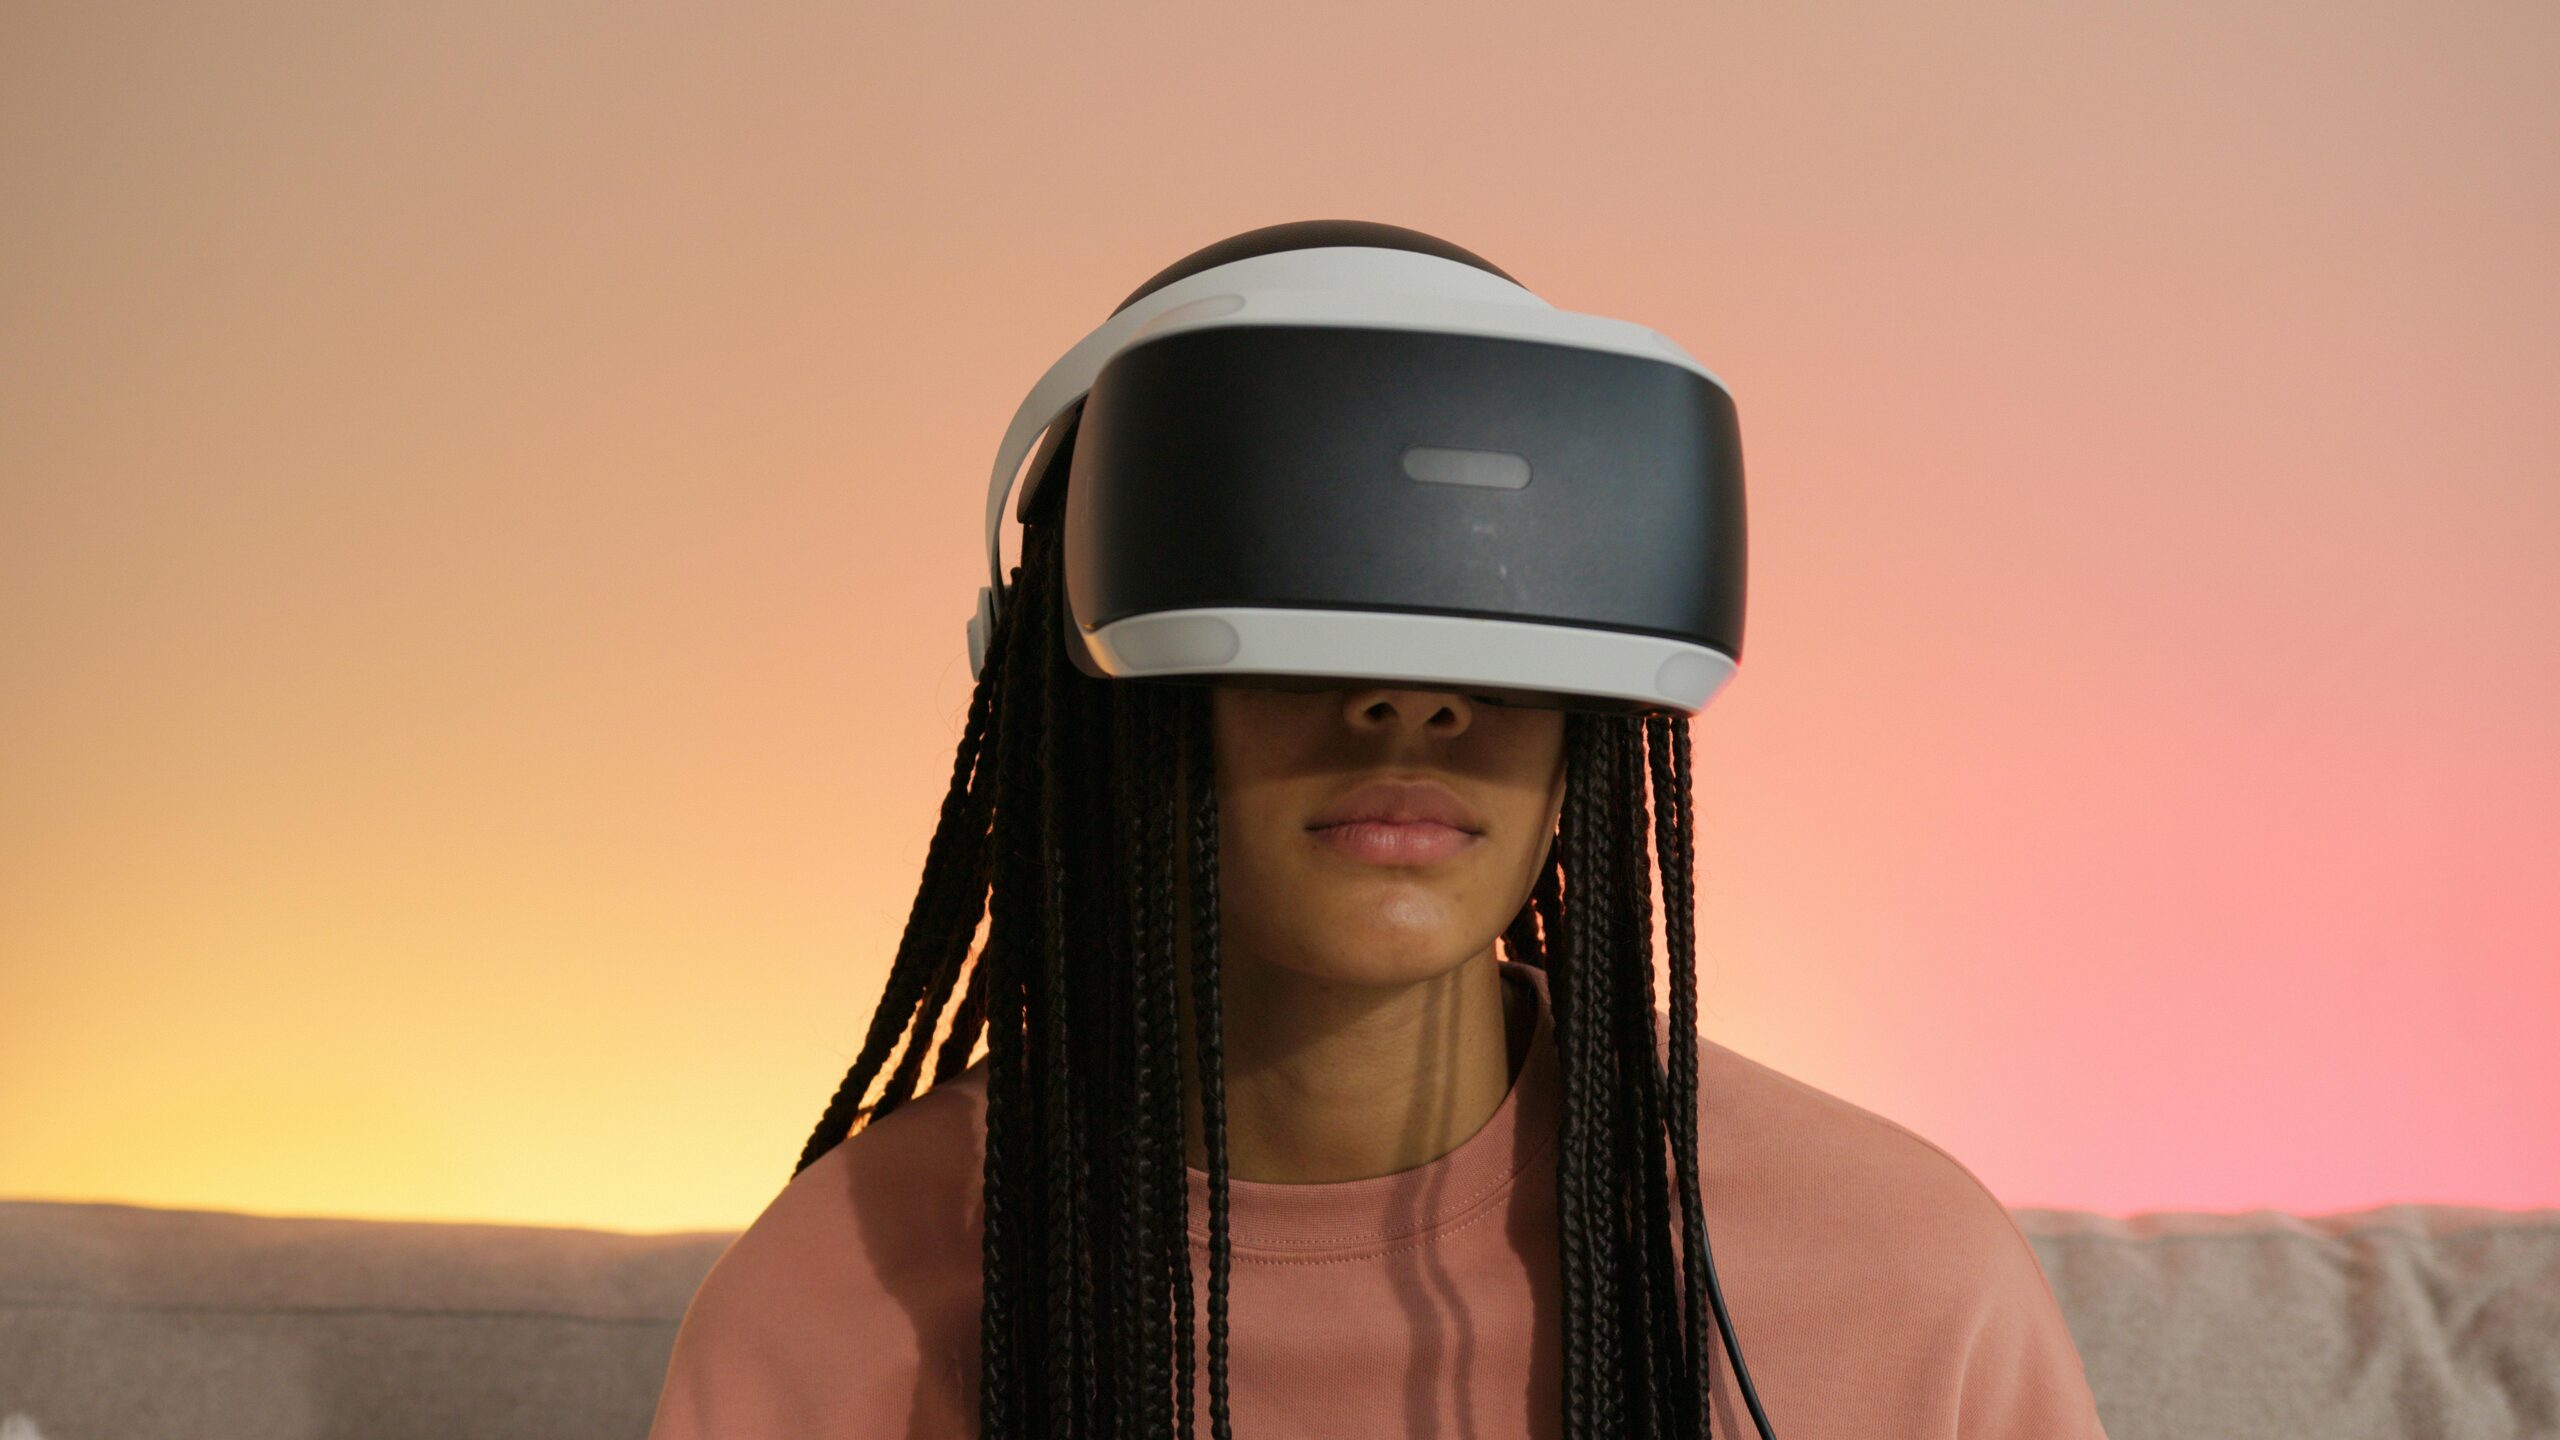 Woman with braided hair wearing a modern VR headset, set against a soft pink sunset background, illustrating the immersive experience of virtual reality.